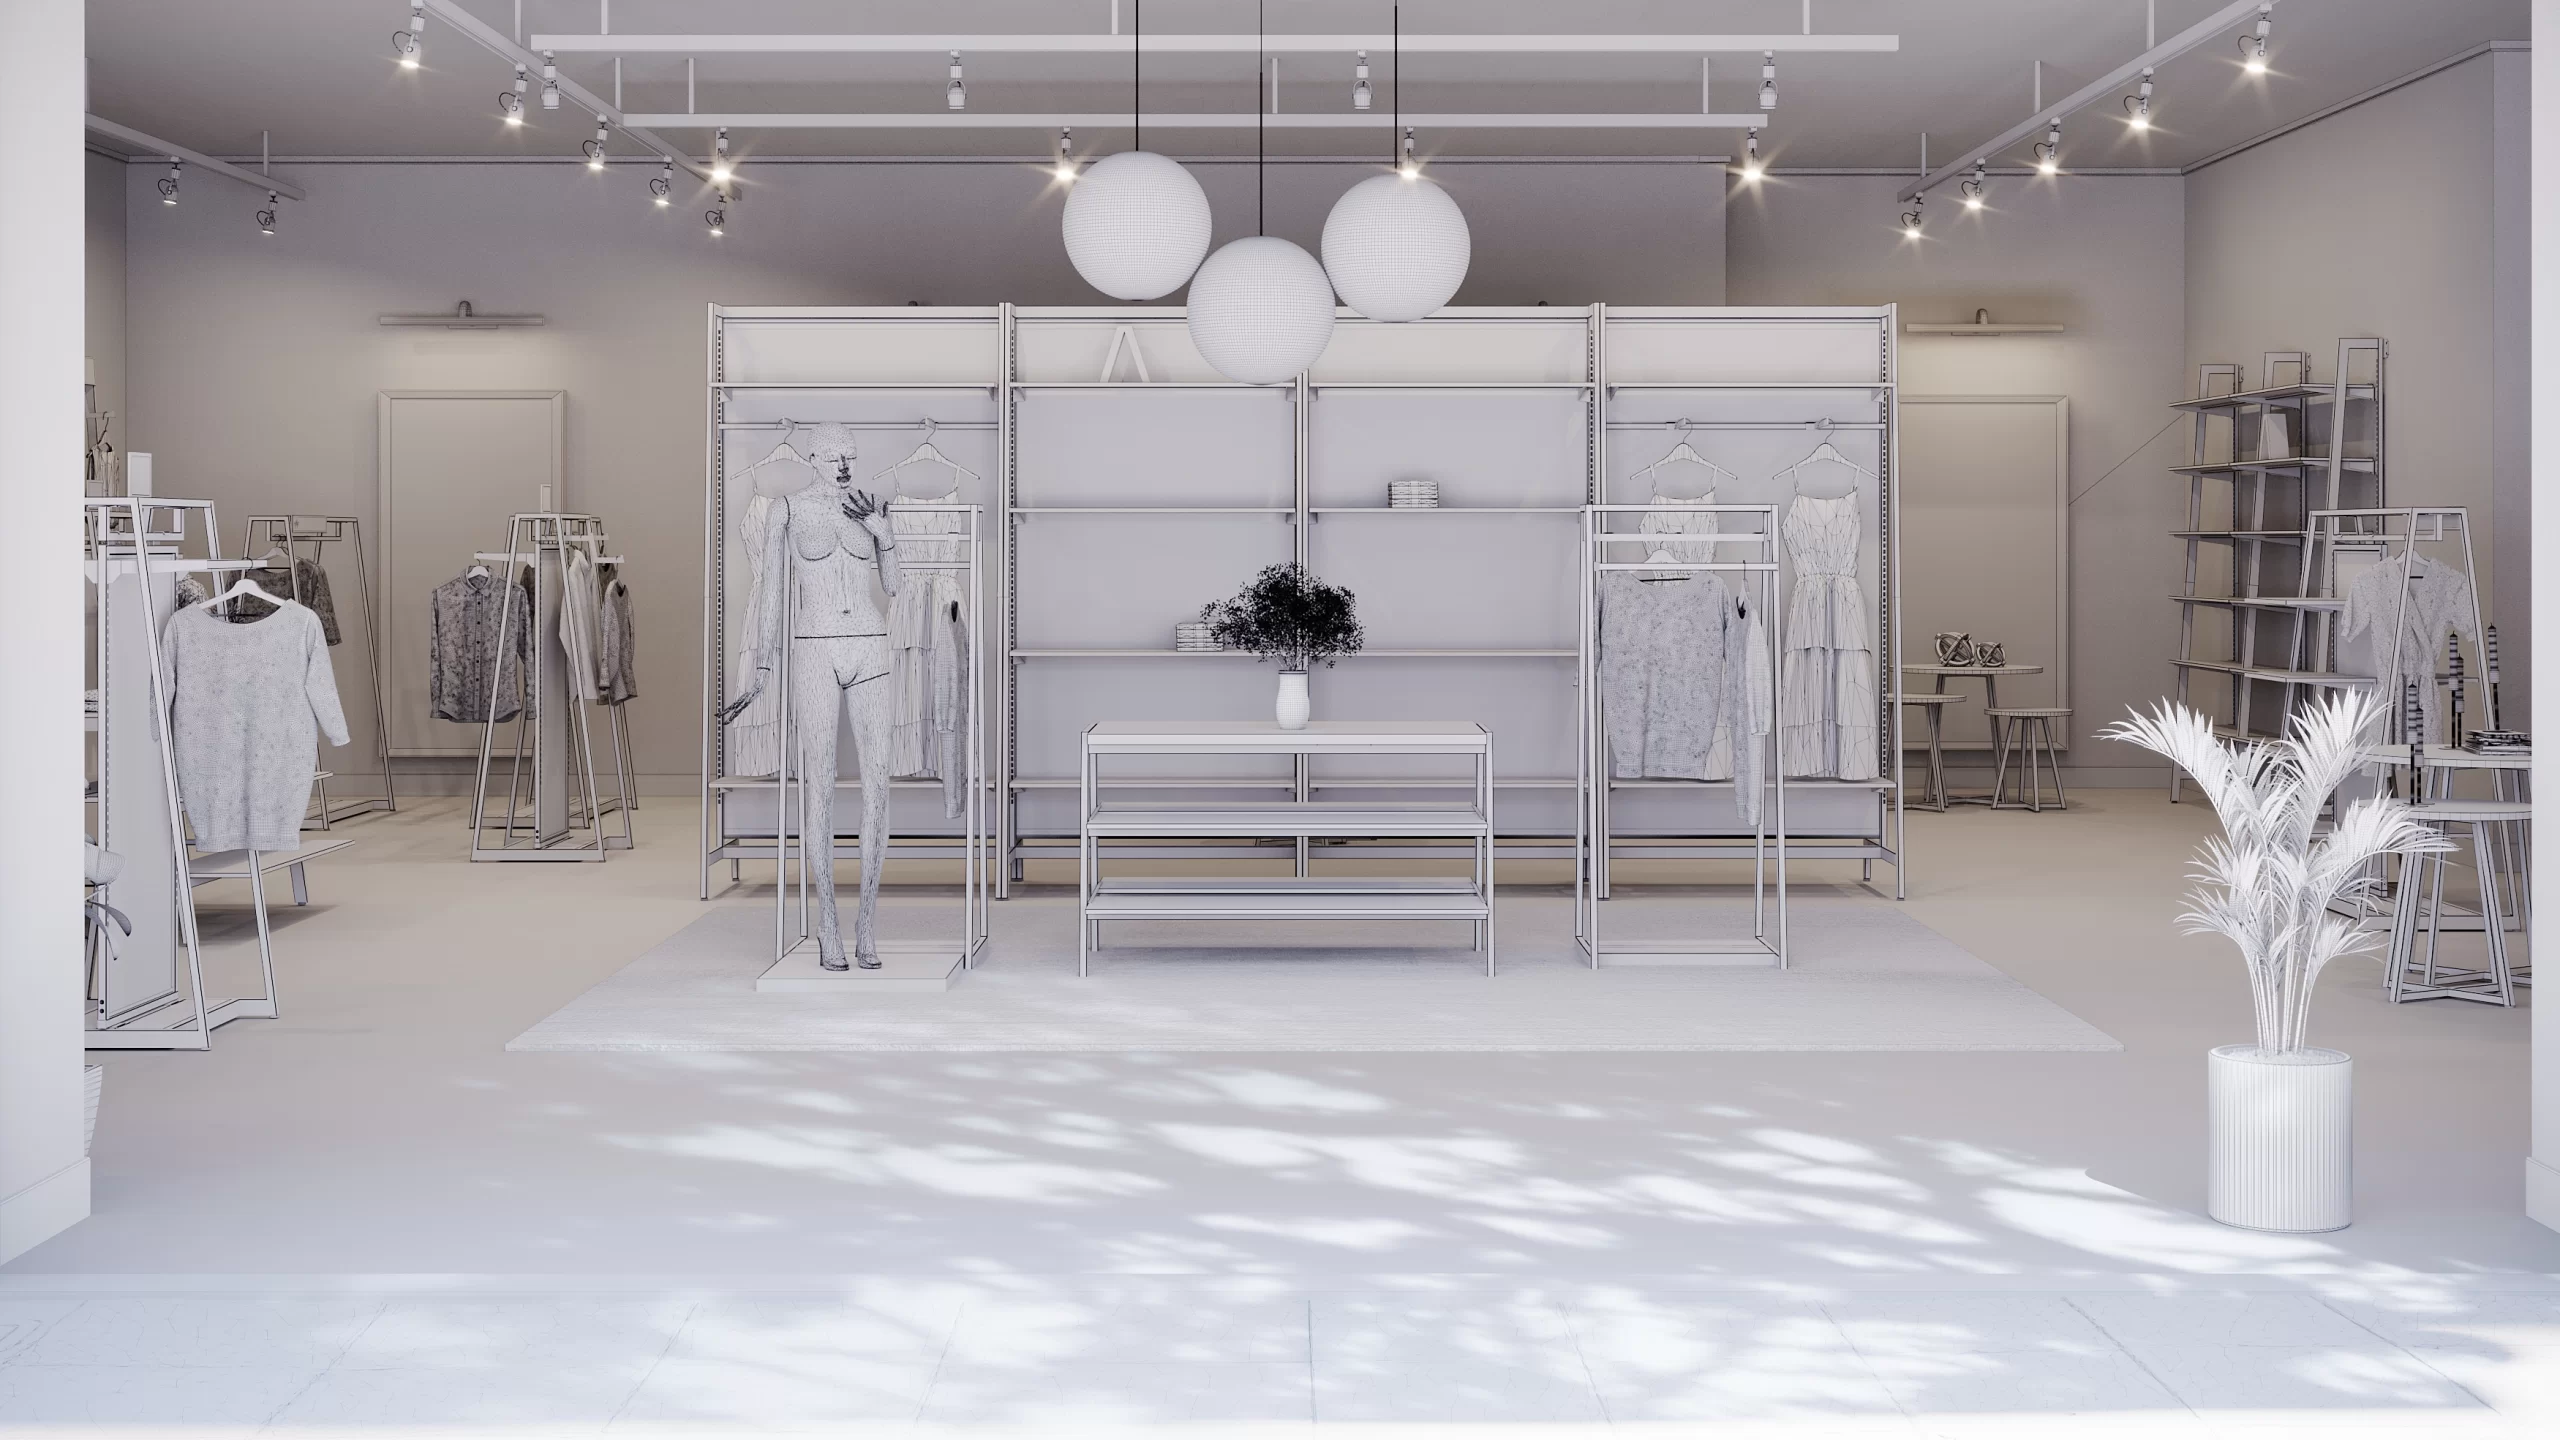 Wireframe rendering of a bright and modern boutique interior designed by CGViz Studio.